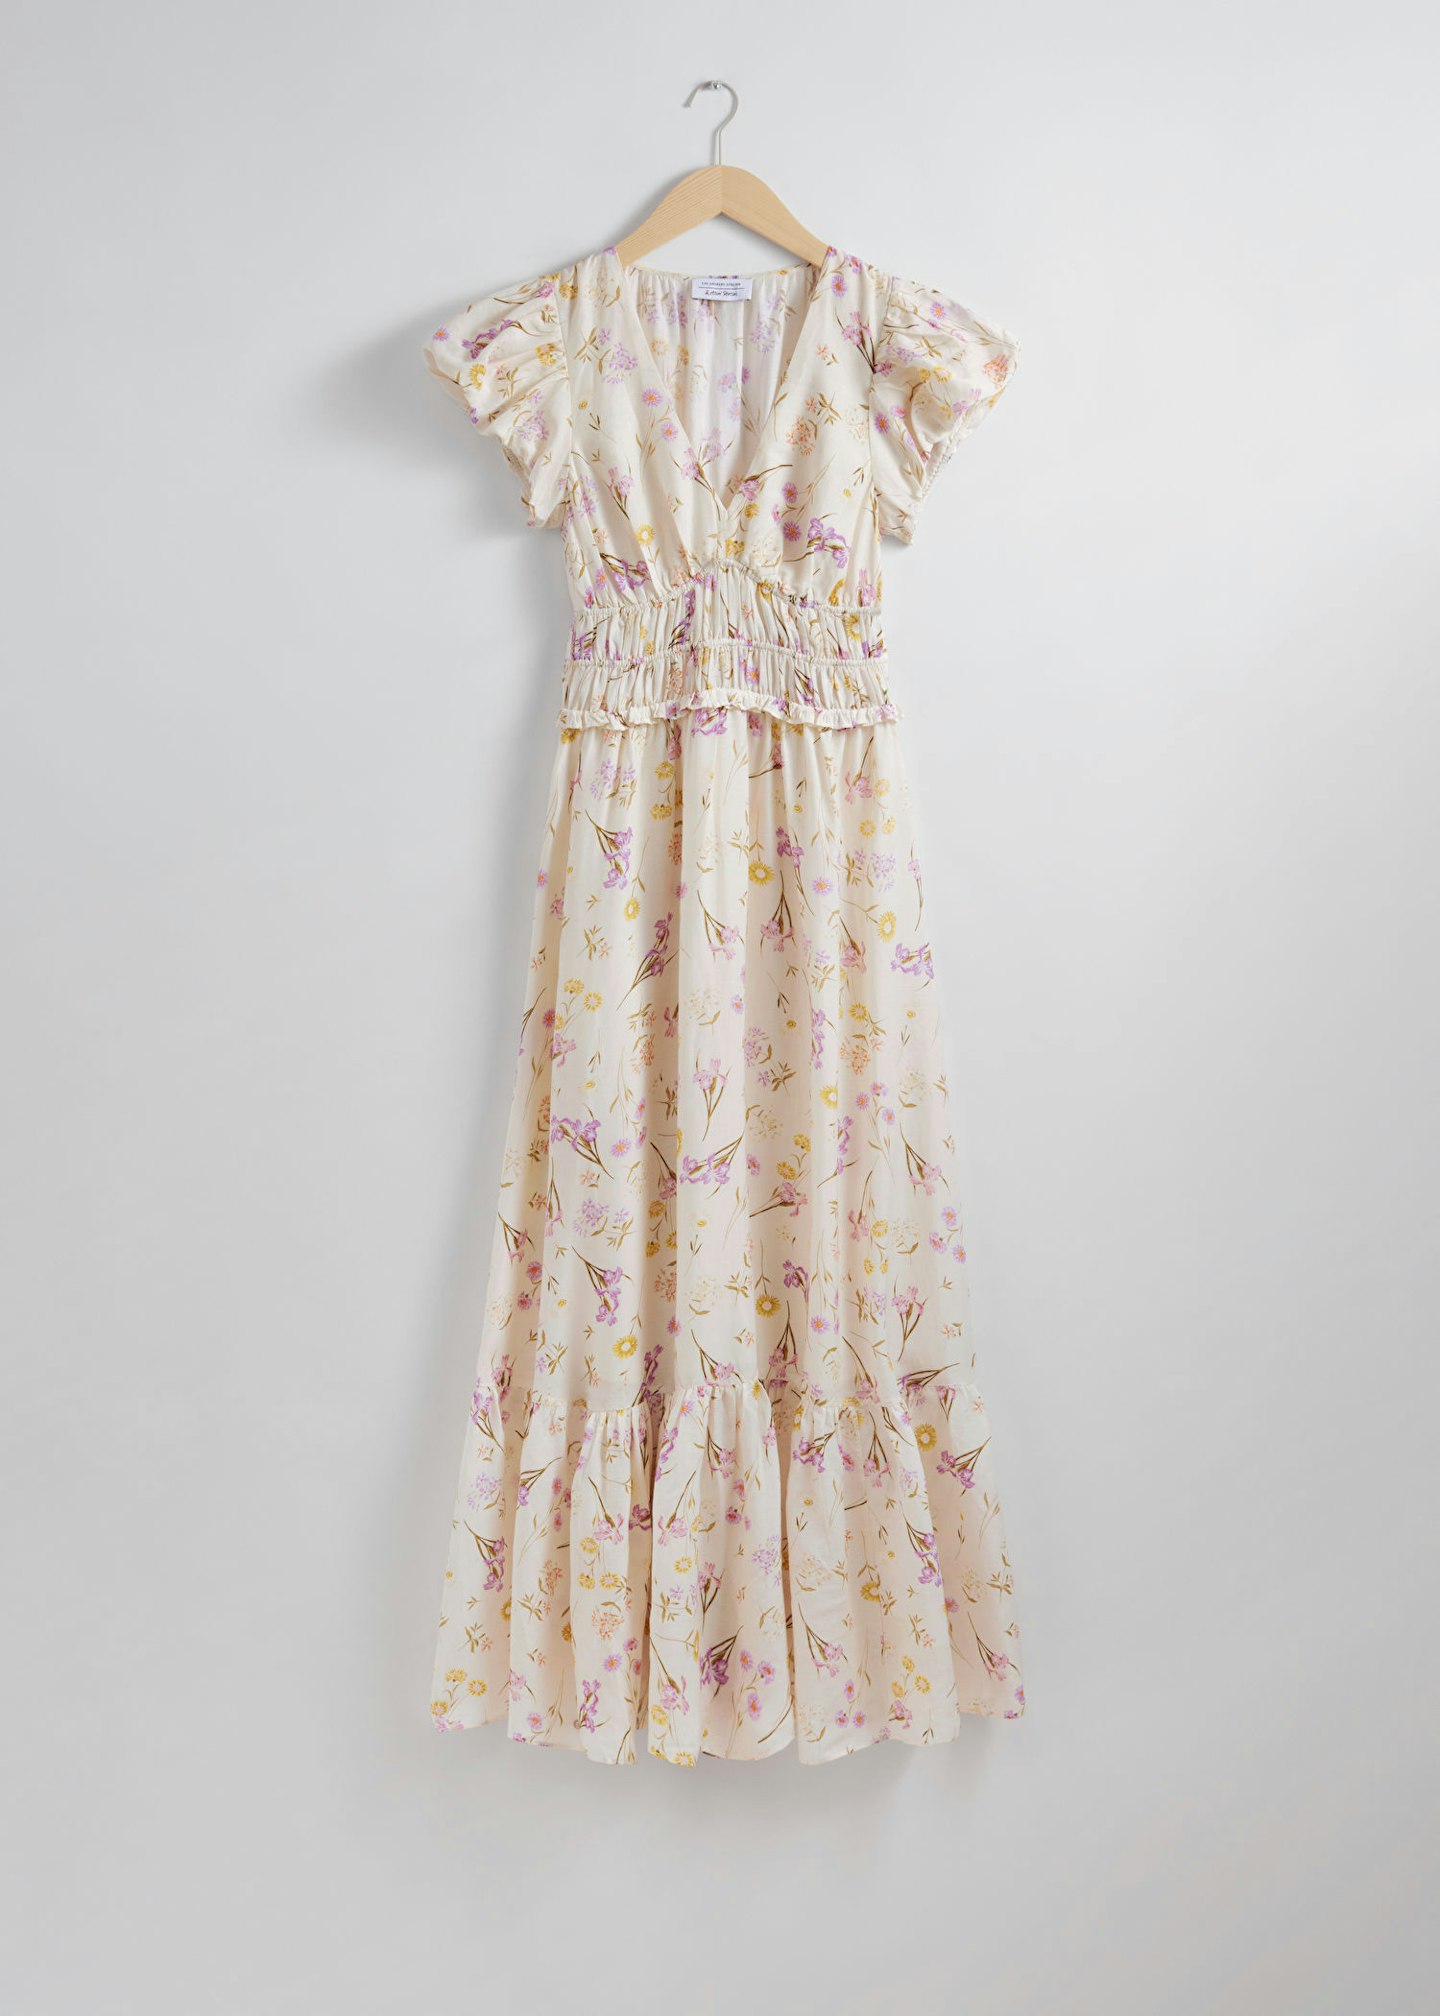 & Other Stories, Tiered Maxi Dress